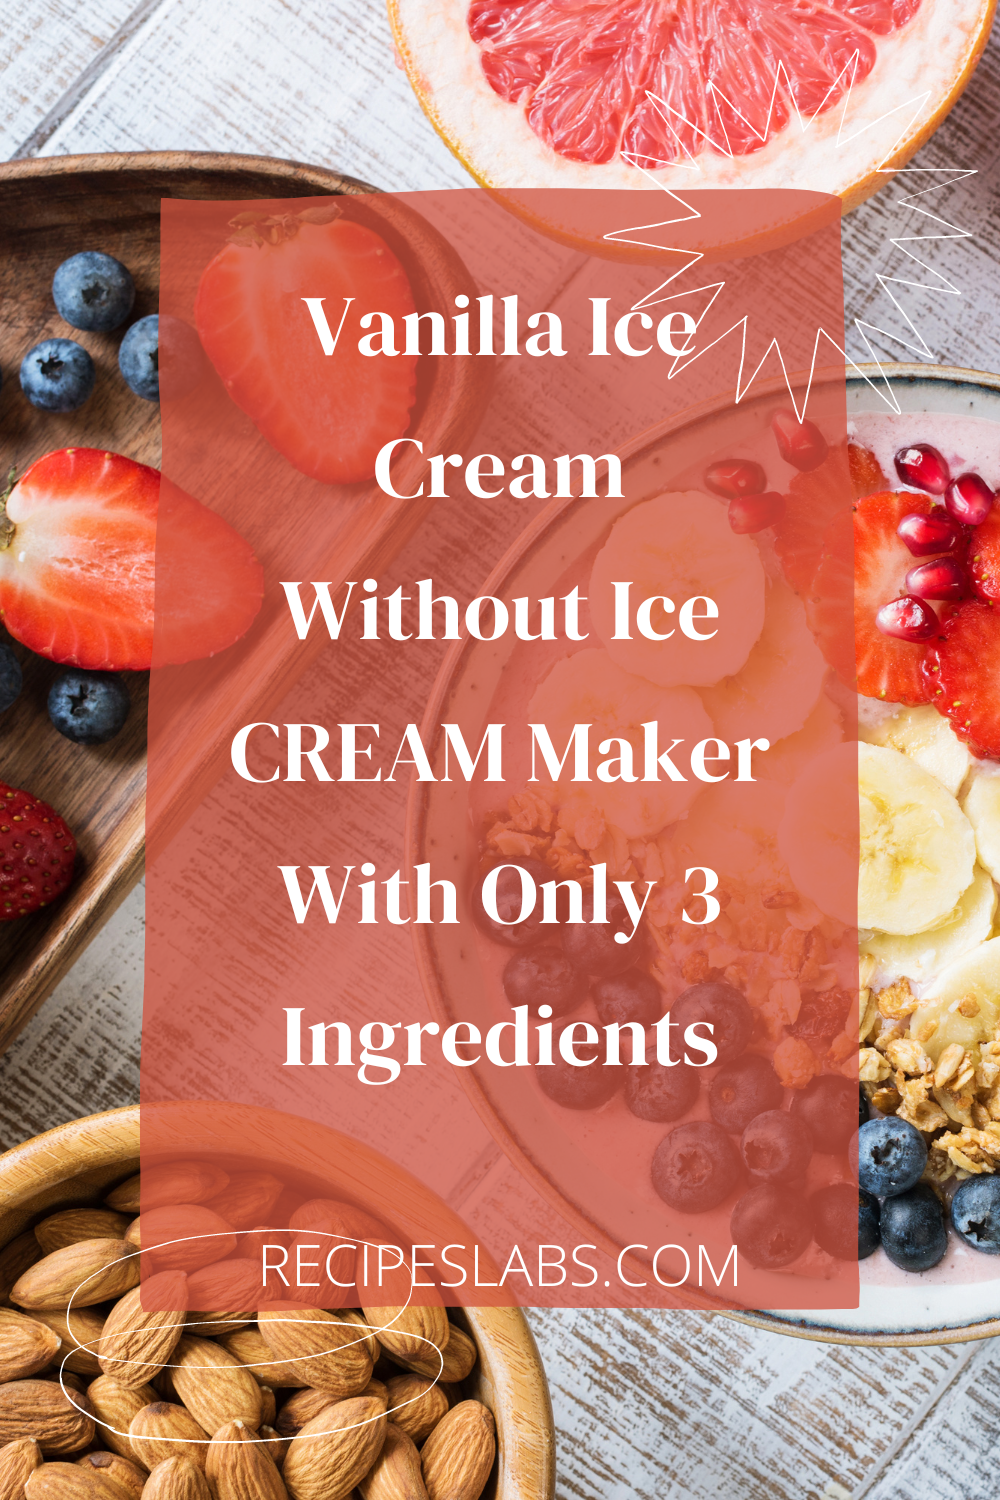 Vanilla Ice Cream Without Ice CREAM Maker With Only 3 Ingredients